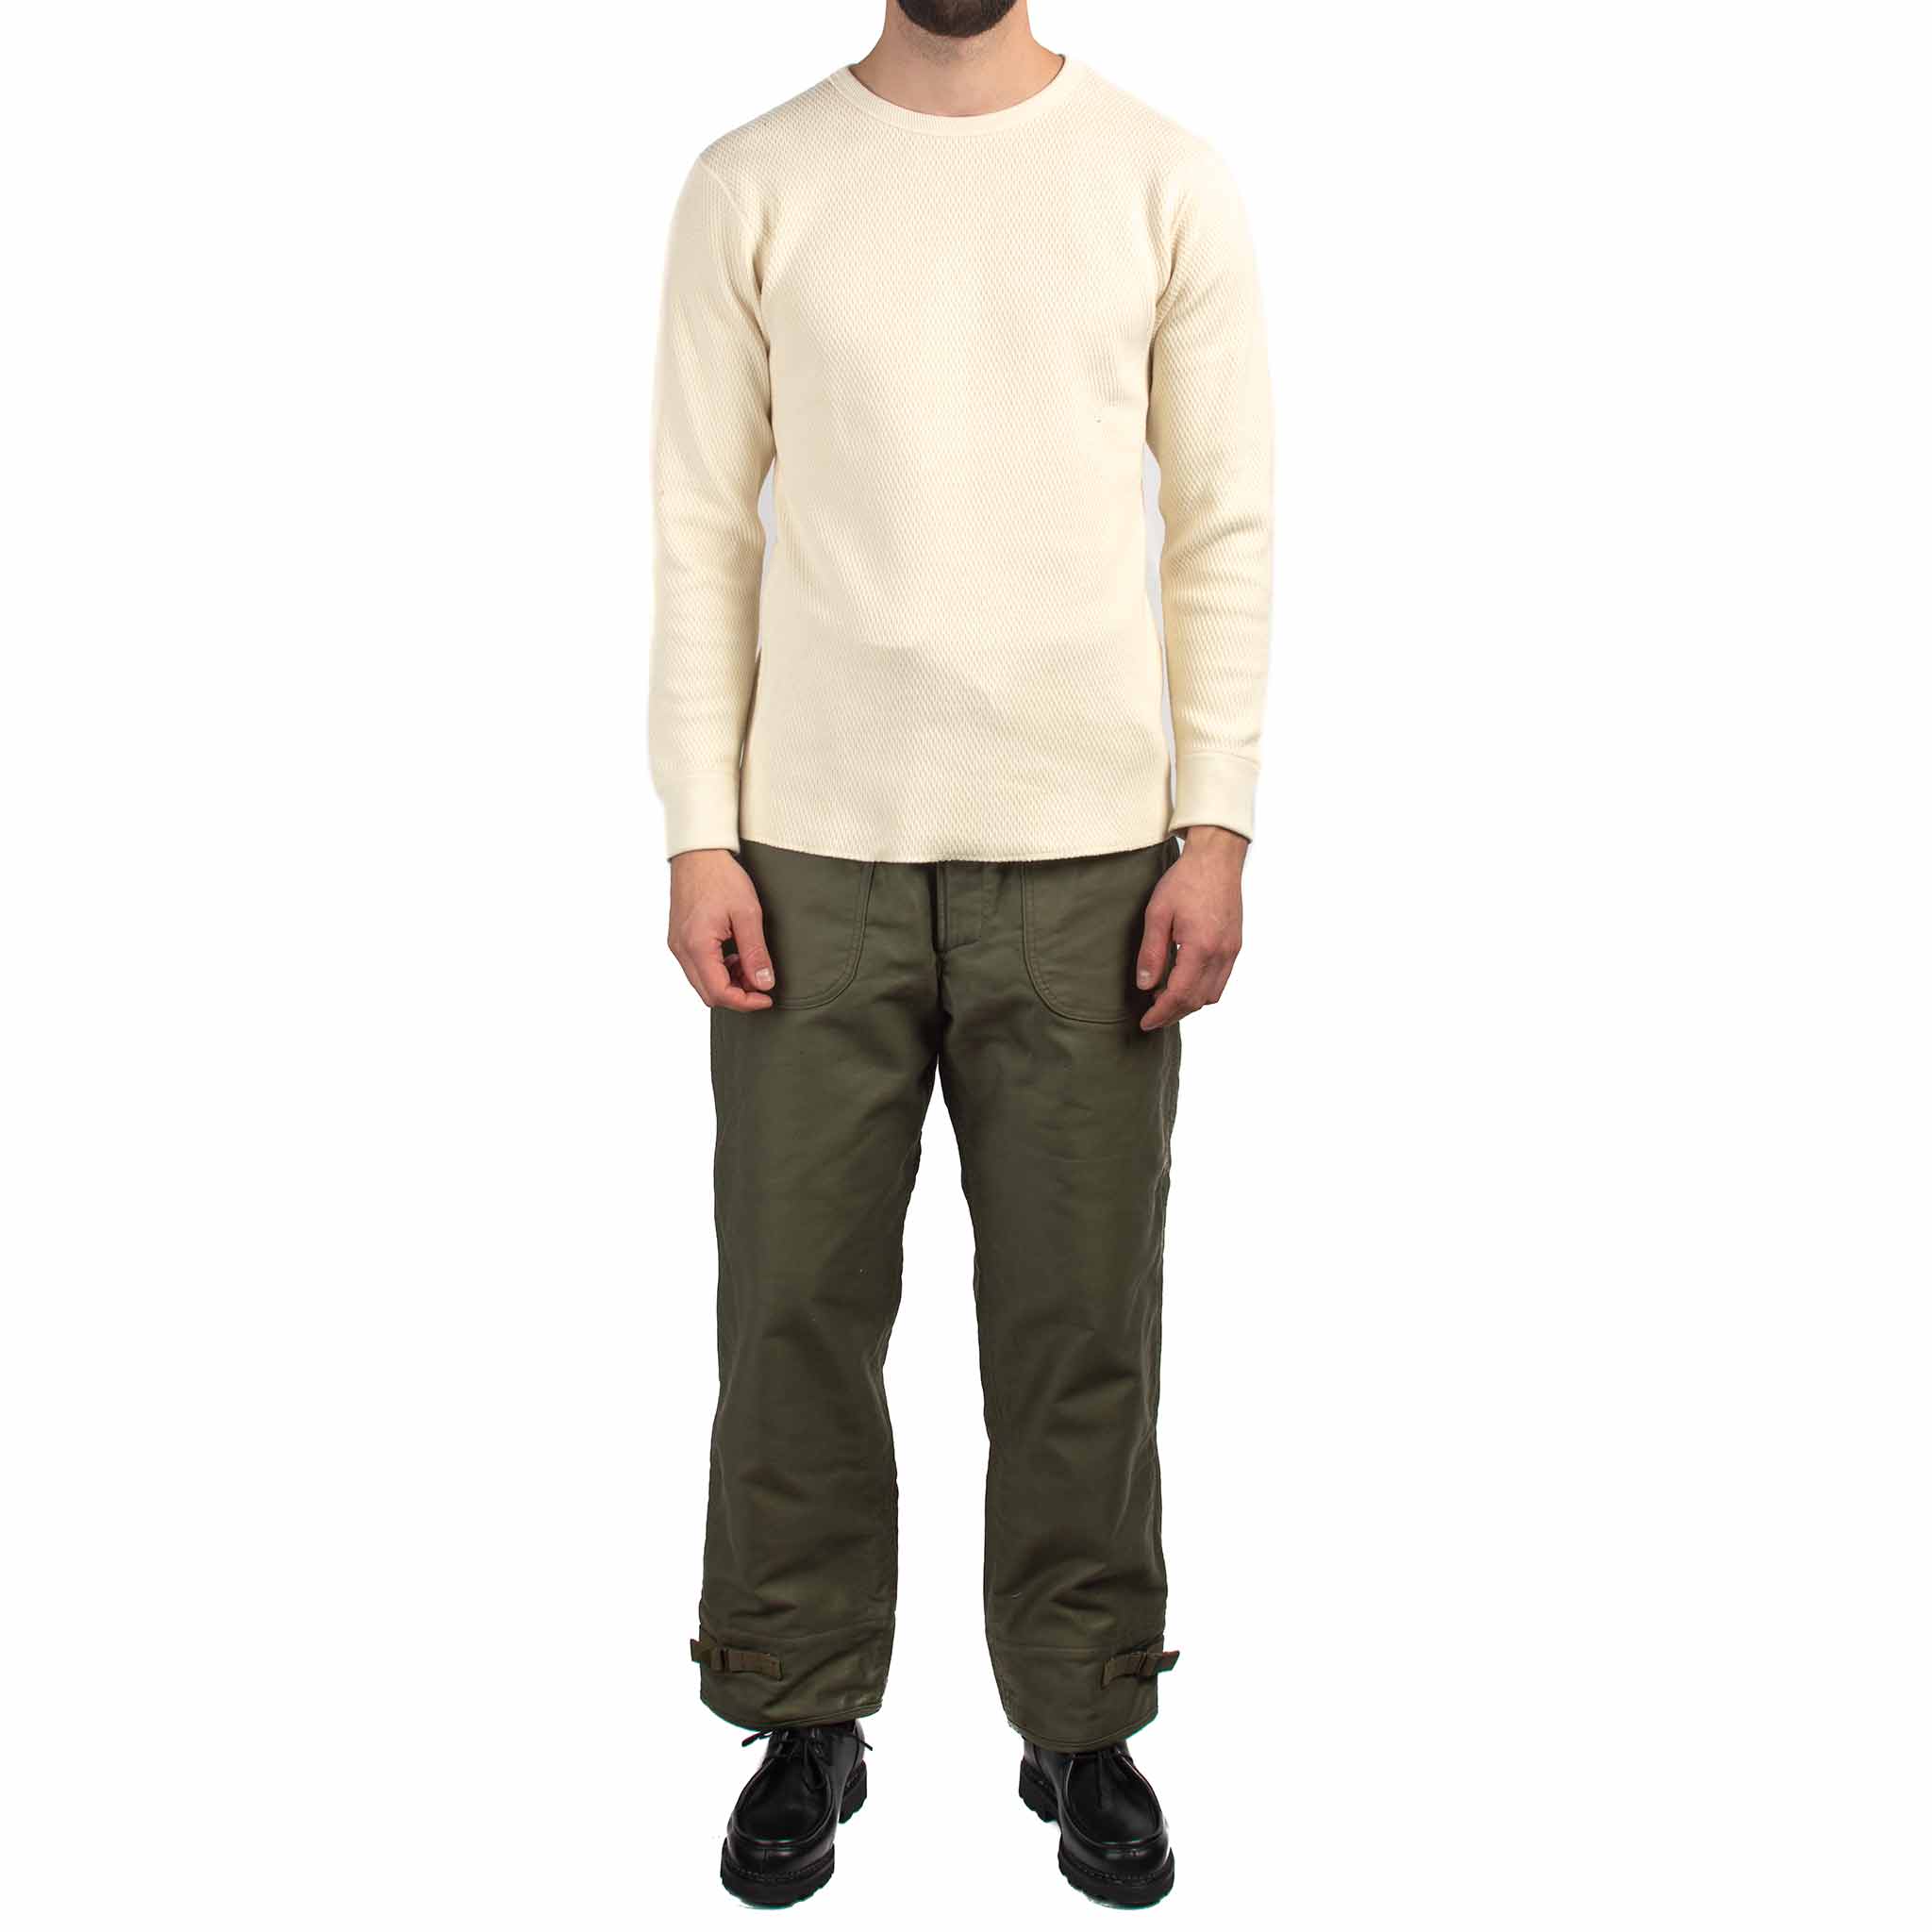 The Real McCoy's MC12110 Military Thermal Shirt Ivory Model